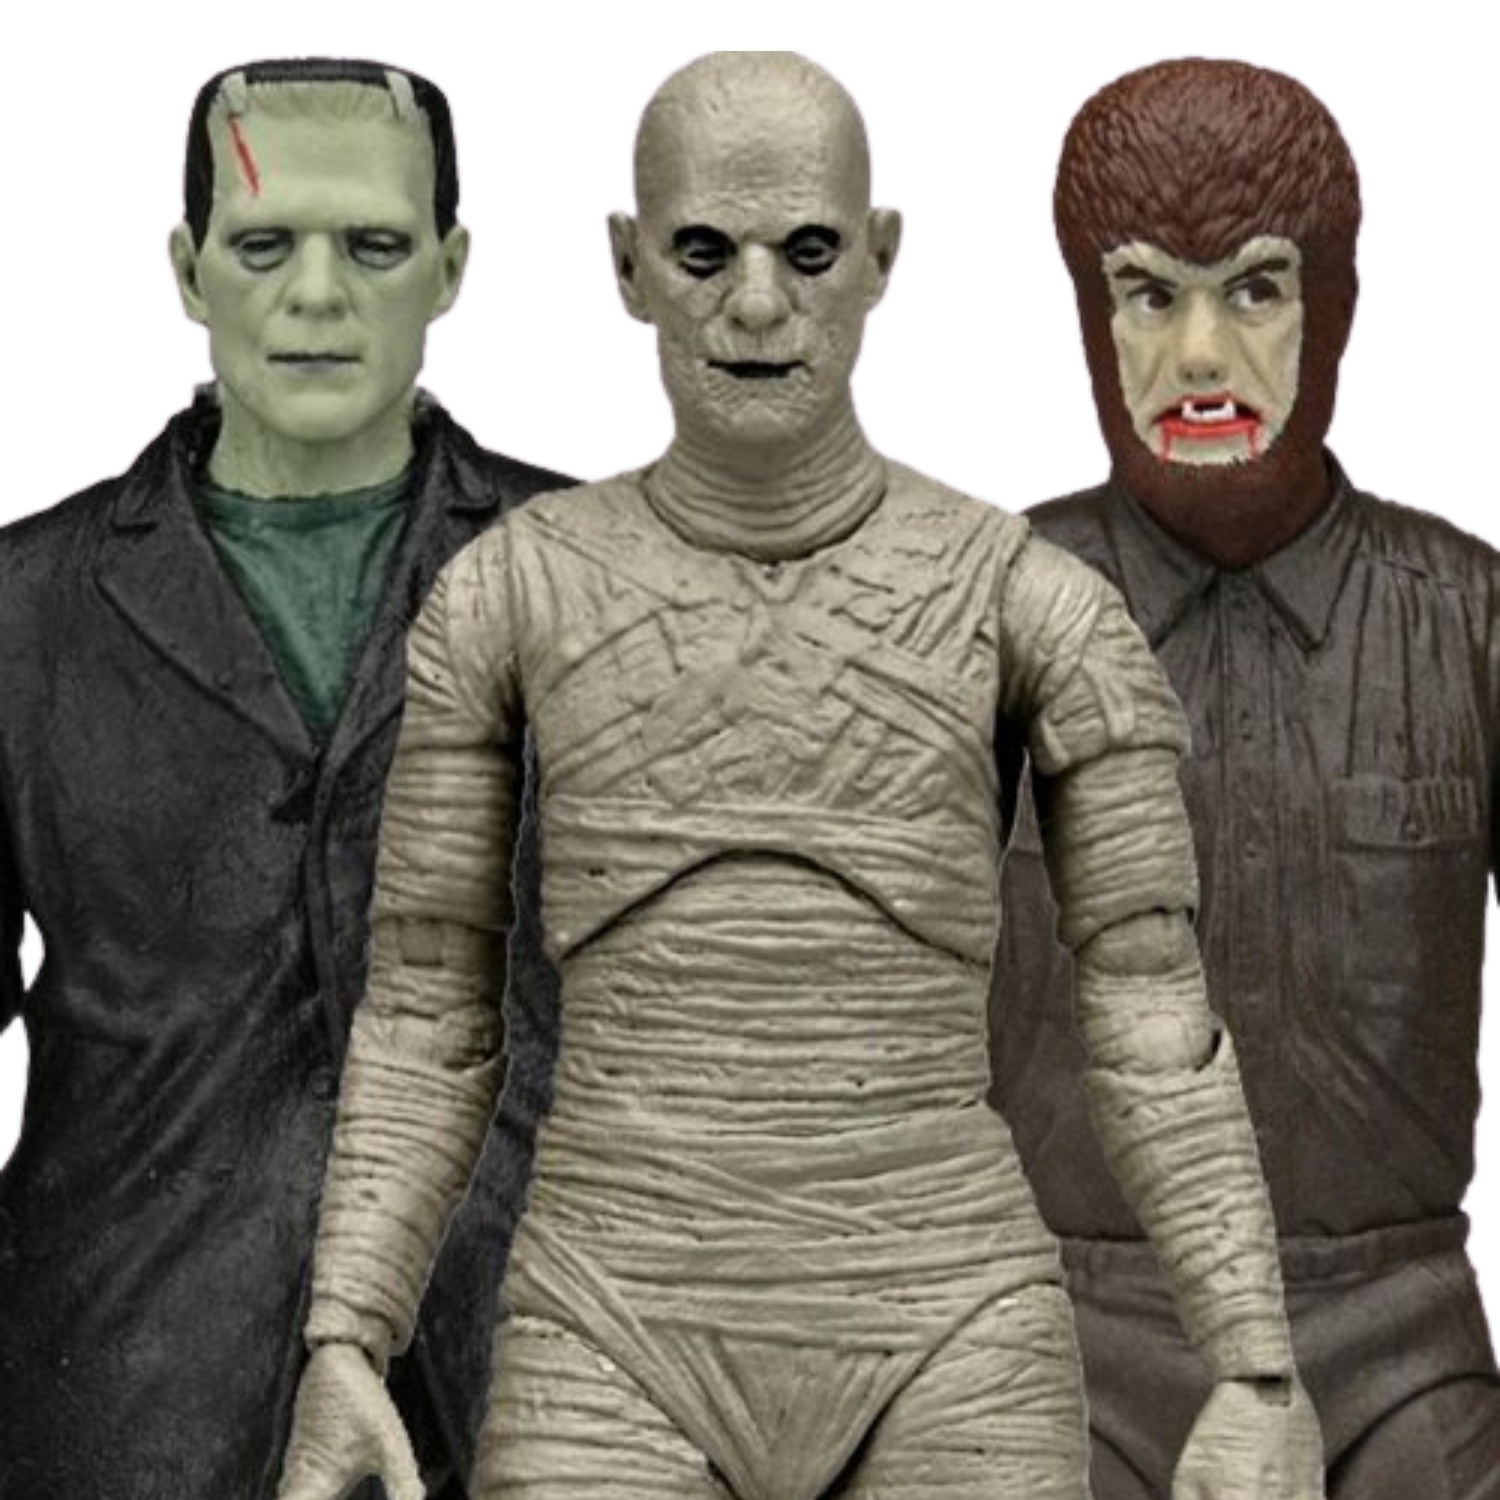 This image shows three figures of Universal monsters, Frankenstein, a mummy, and the Wolfman